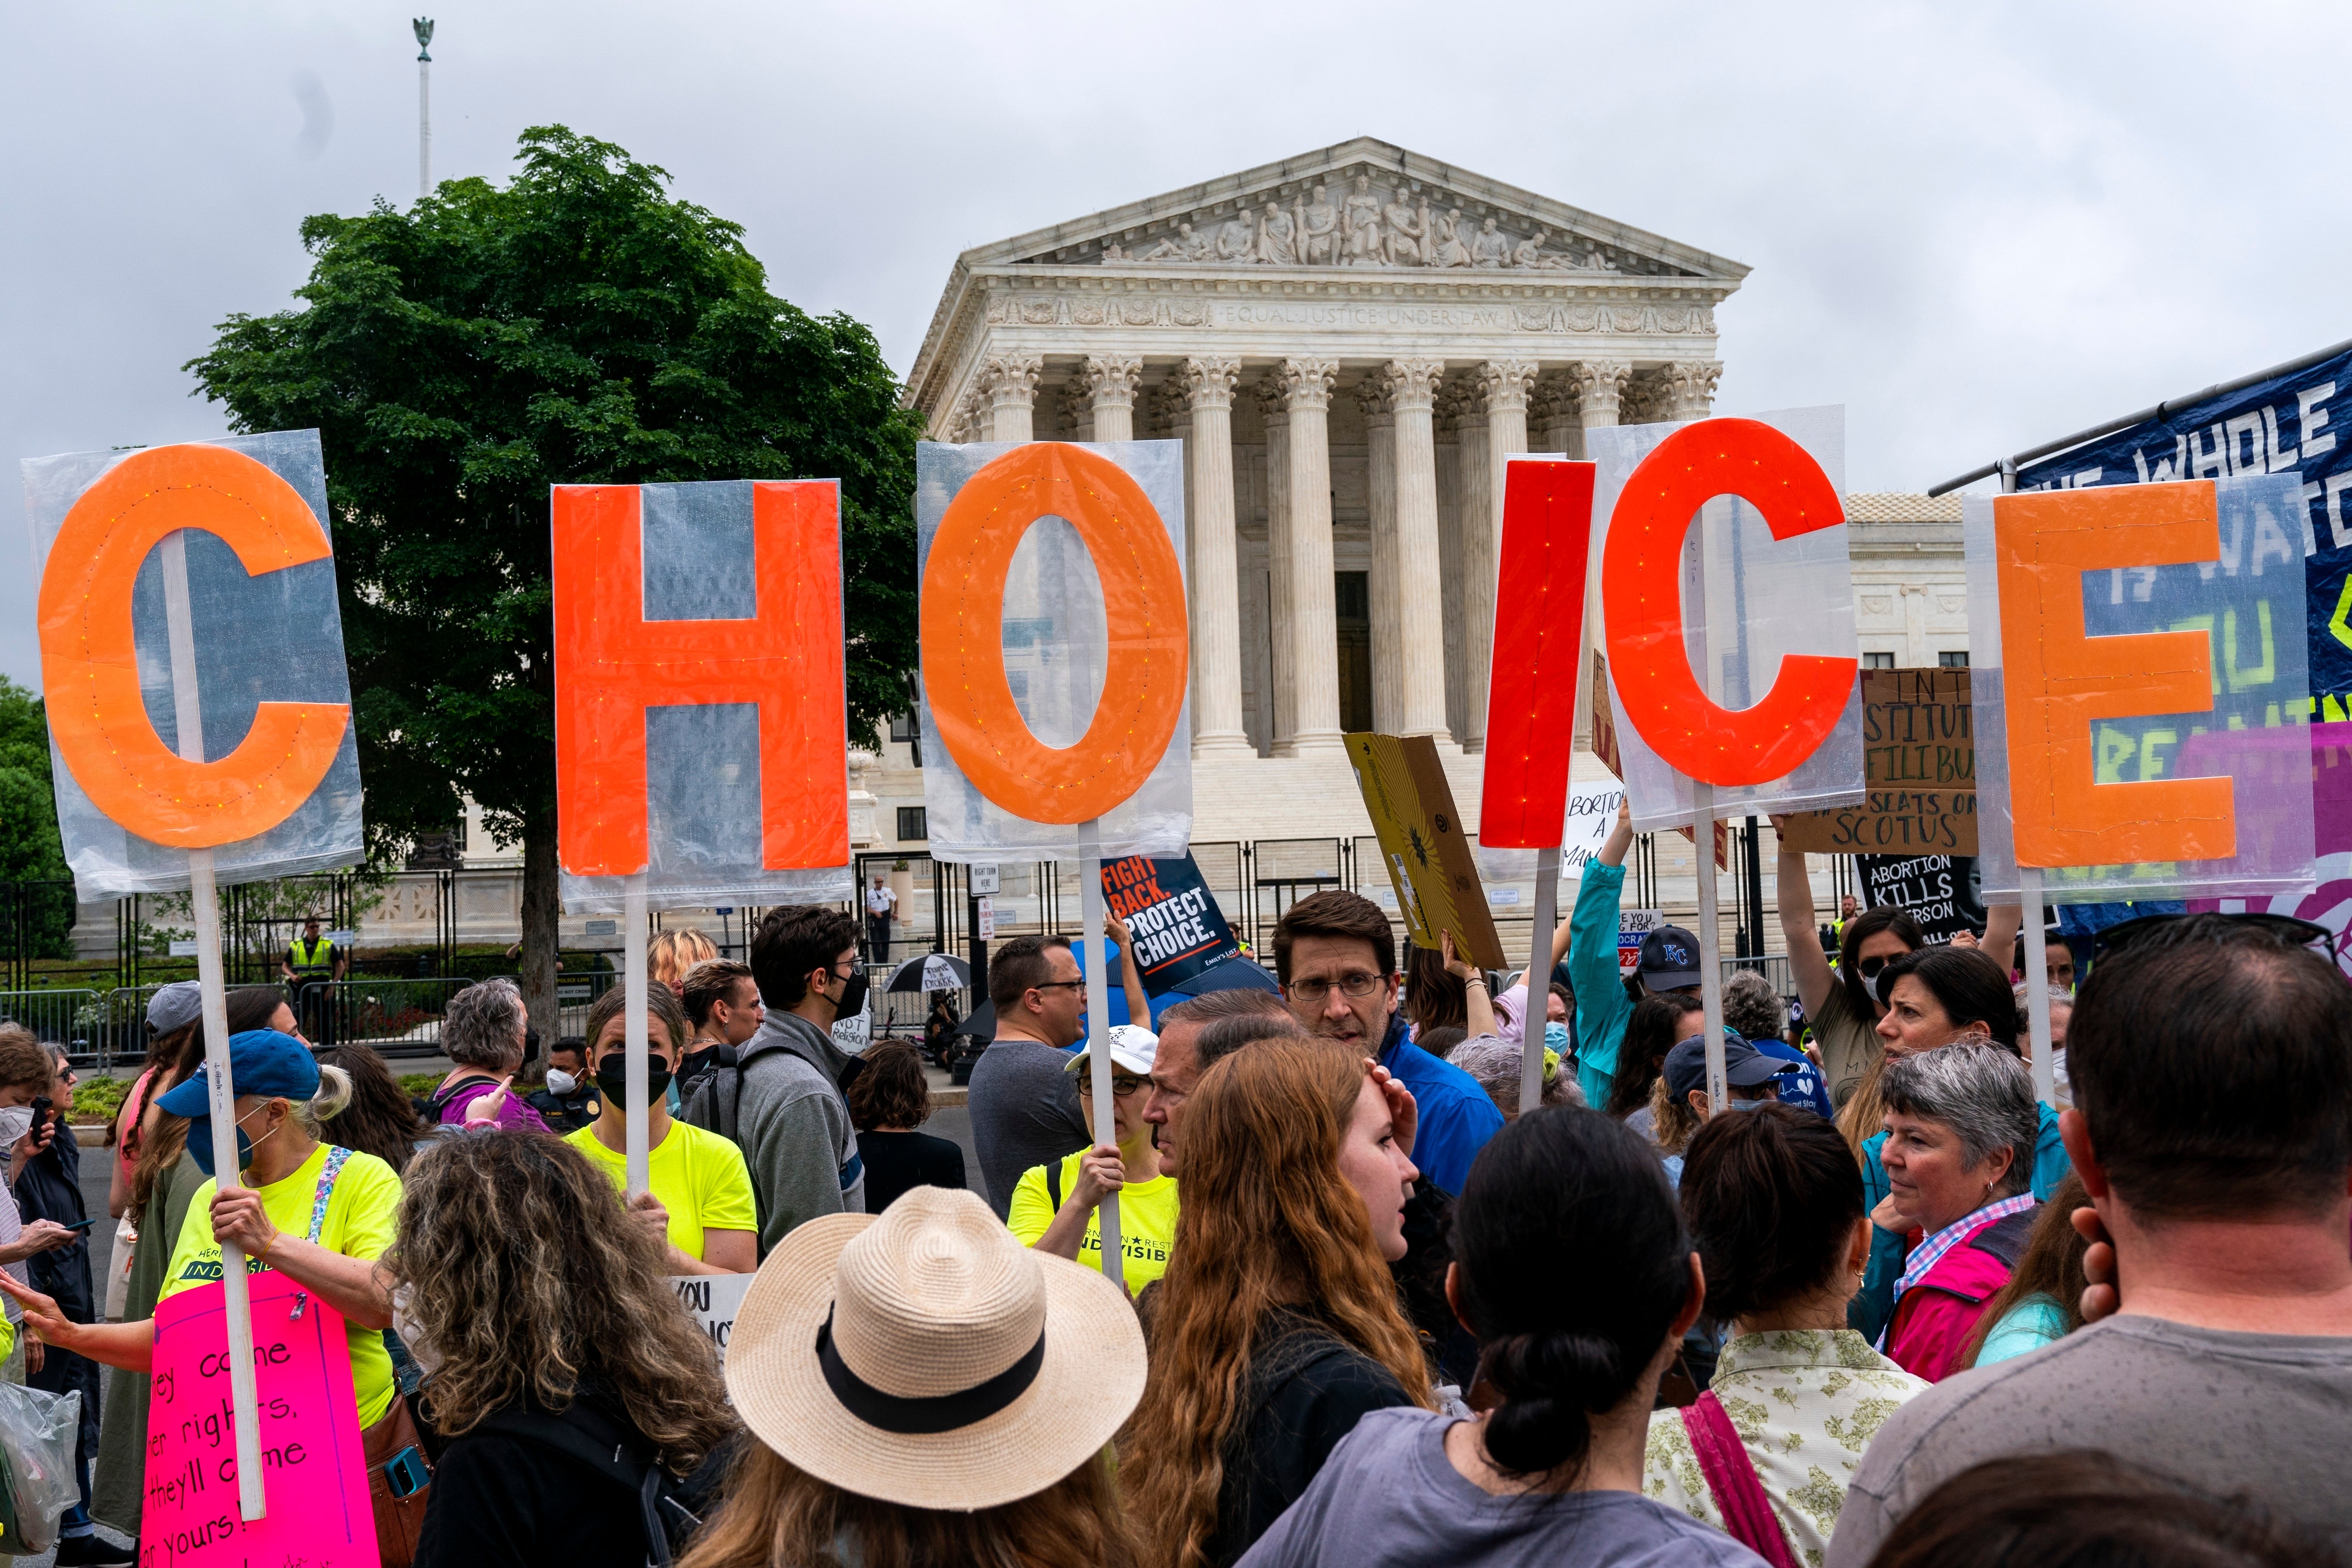 Abortion-rights demonstrators hold up letters spelling out "My Choice," Saturday, May 14, 2022, outside the Supreme Court in Washington. (AP Photo/Jacquelyn Martin)